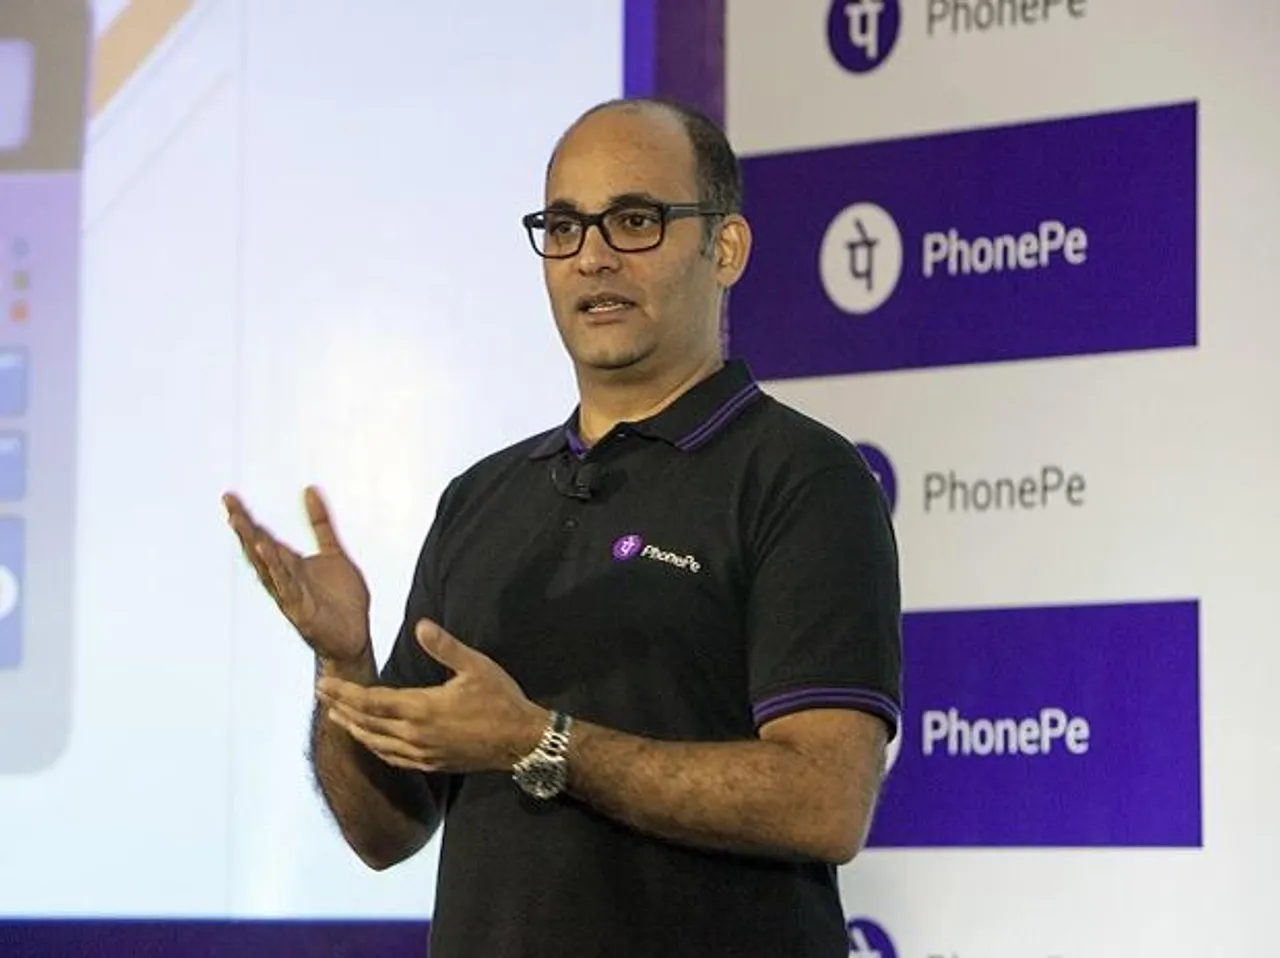 PhonePe Enables Seamless Purchase of App Store Codes